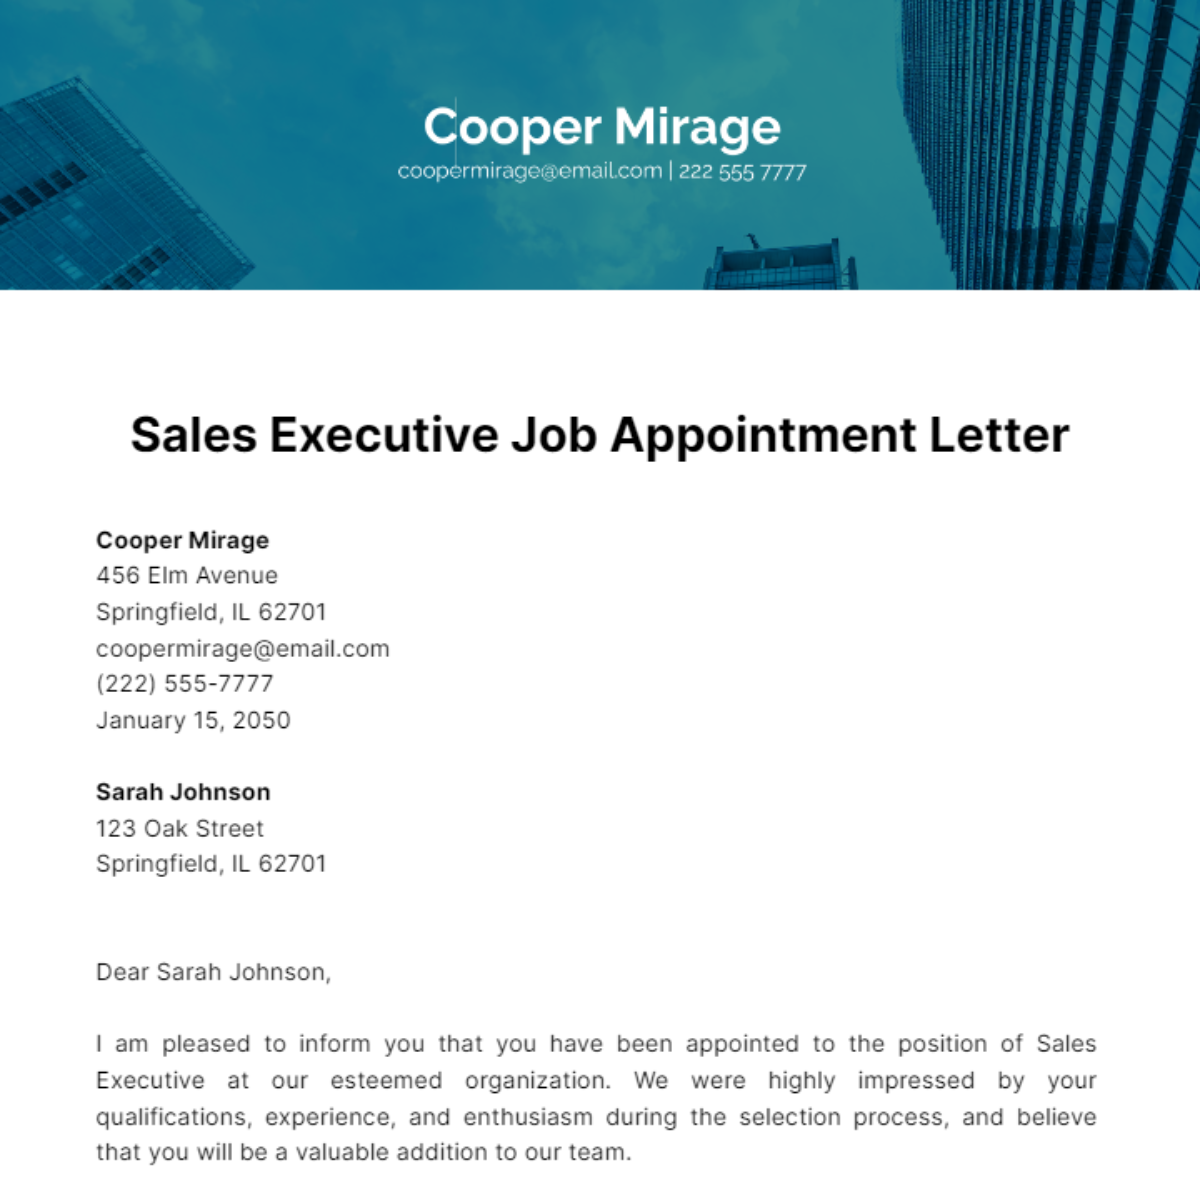 Sales Executive Job Appointment Letter Template